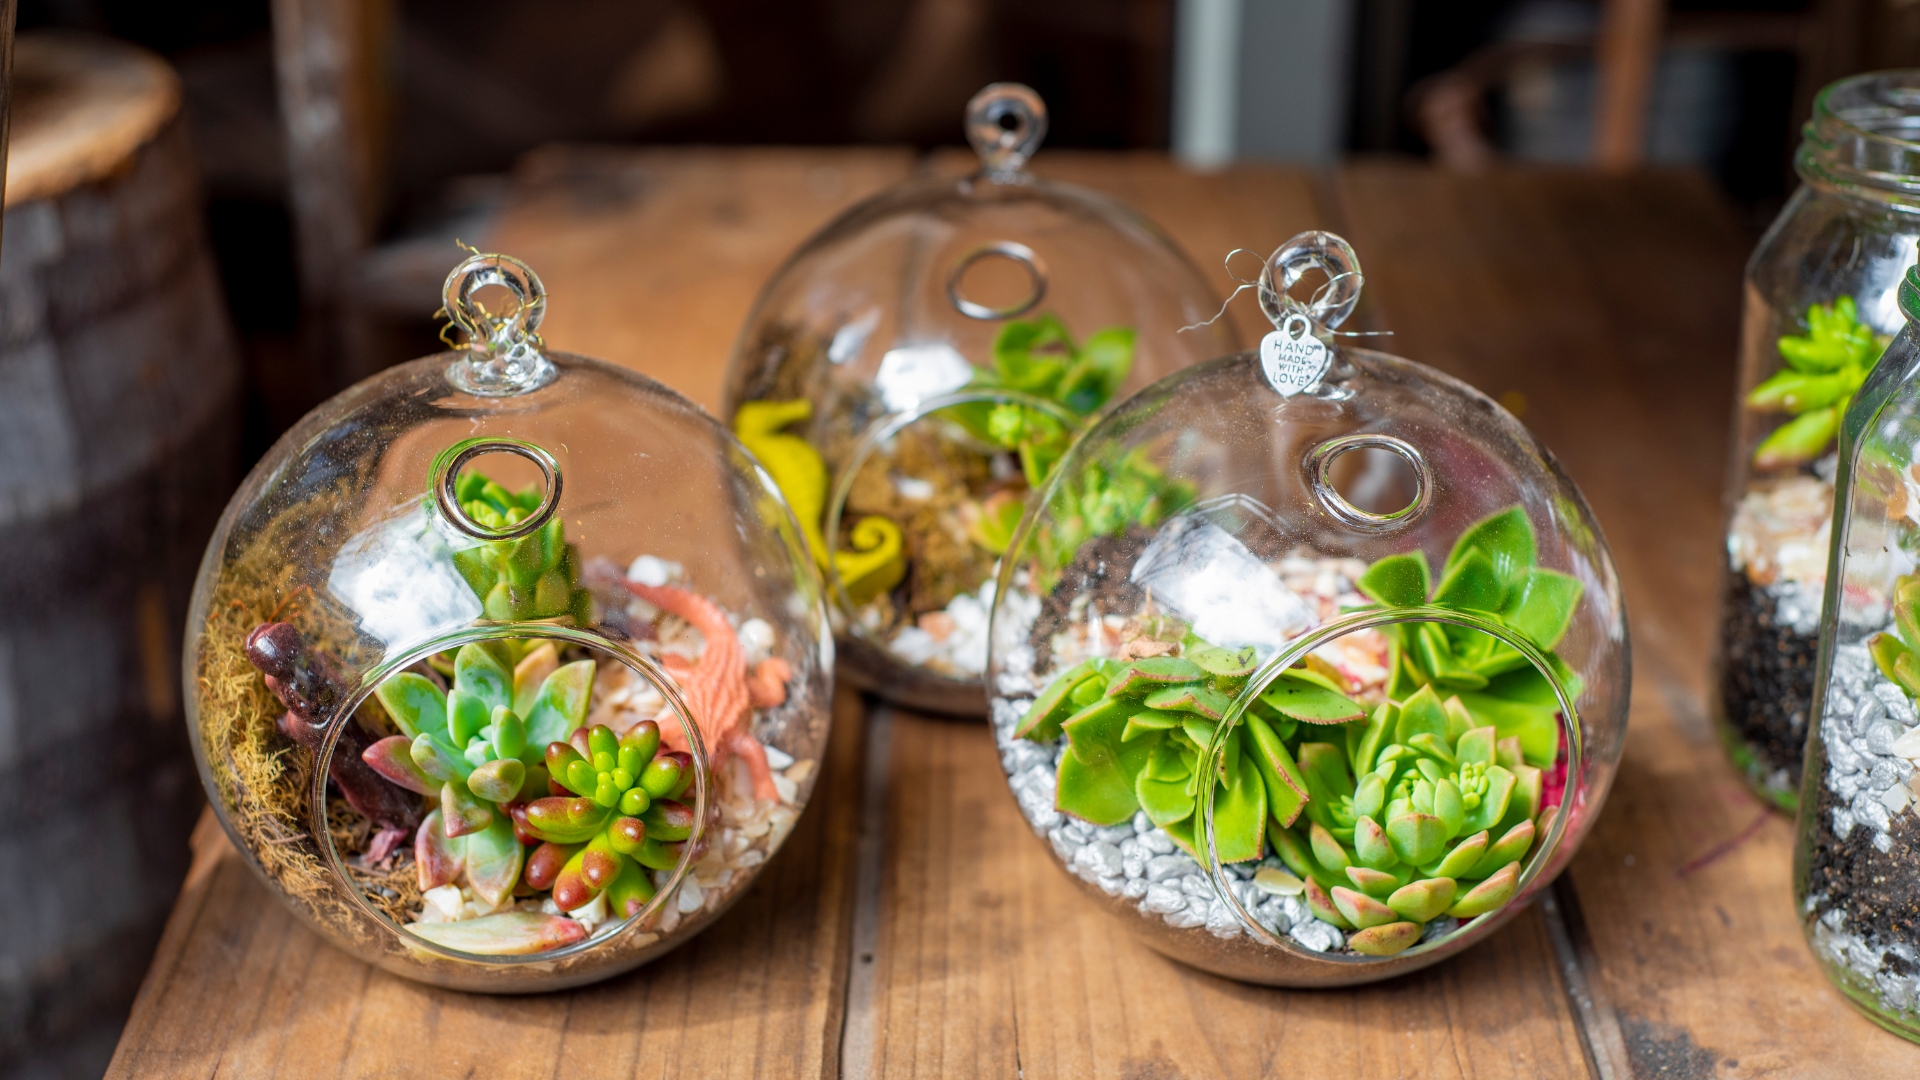 Don’t Put Just Any Plant In Your Terrarium. Check Out 7 Ideal Plants For Thriving Terrariums!